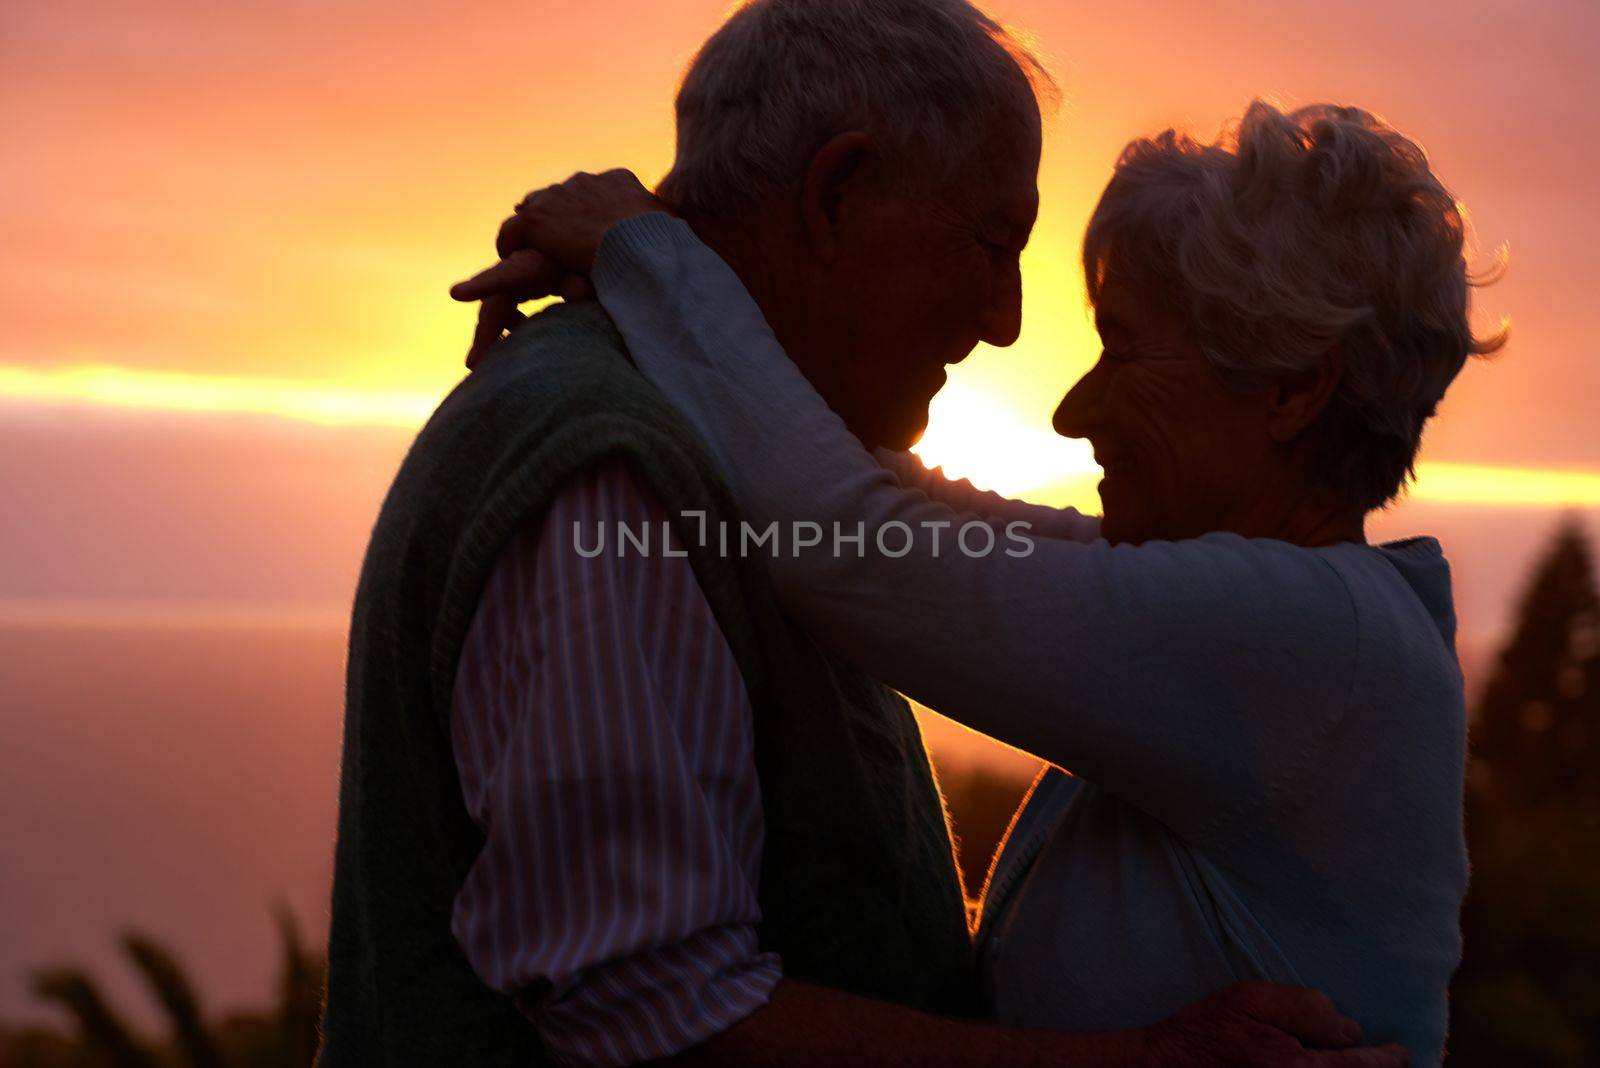 The romance is still going strong. an elderly couple sharing a romantic moment at sunset